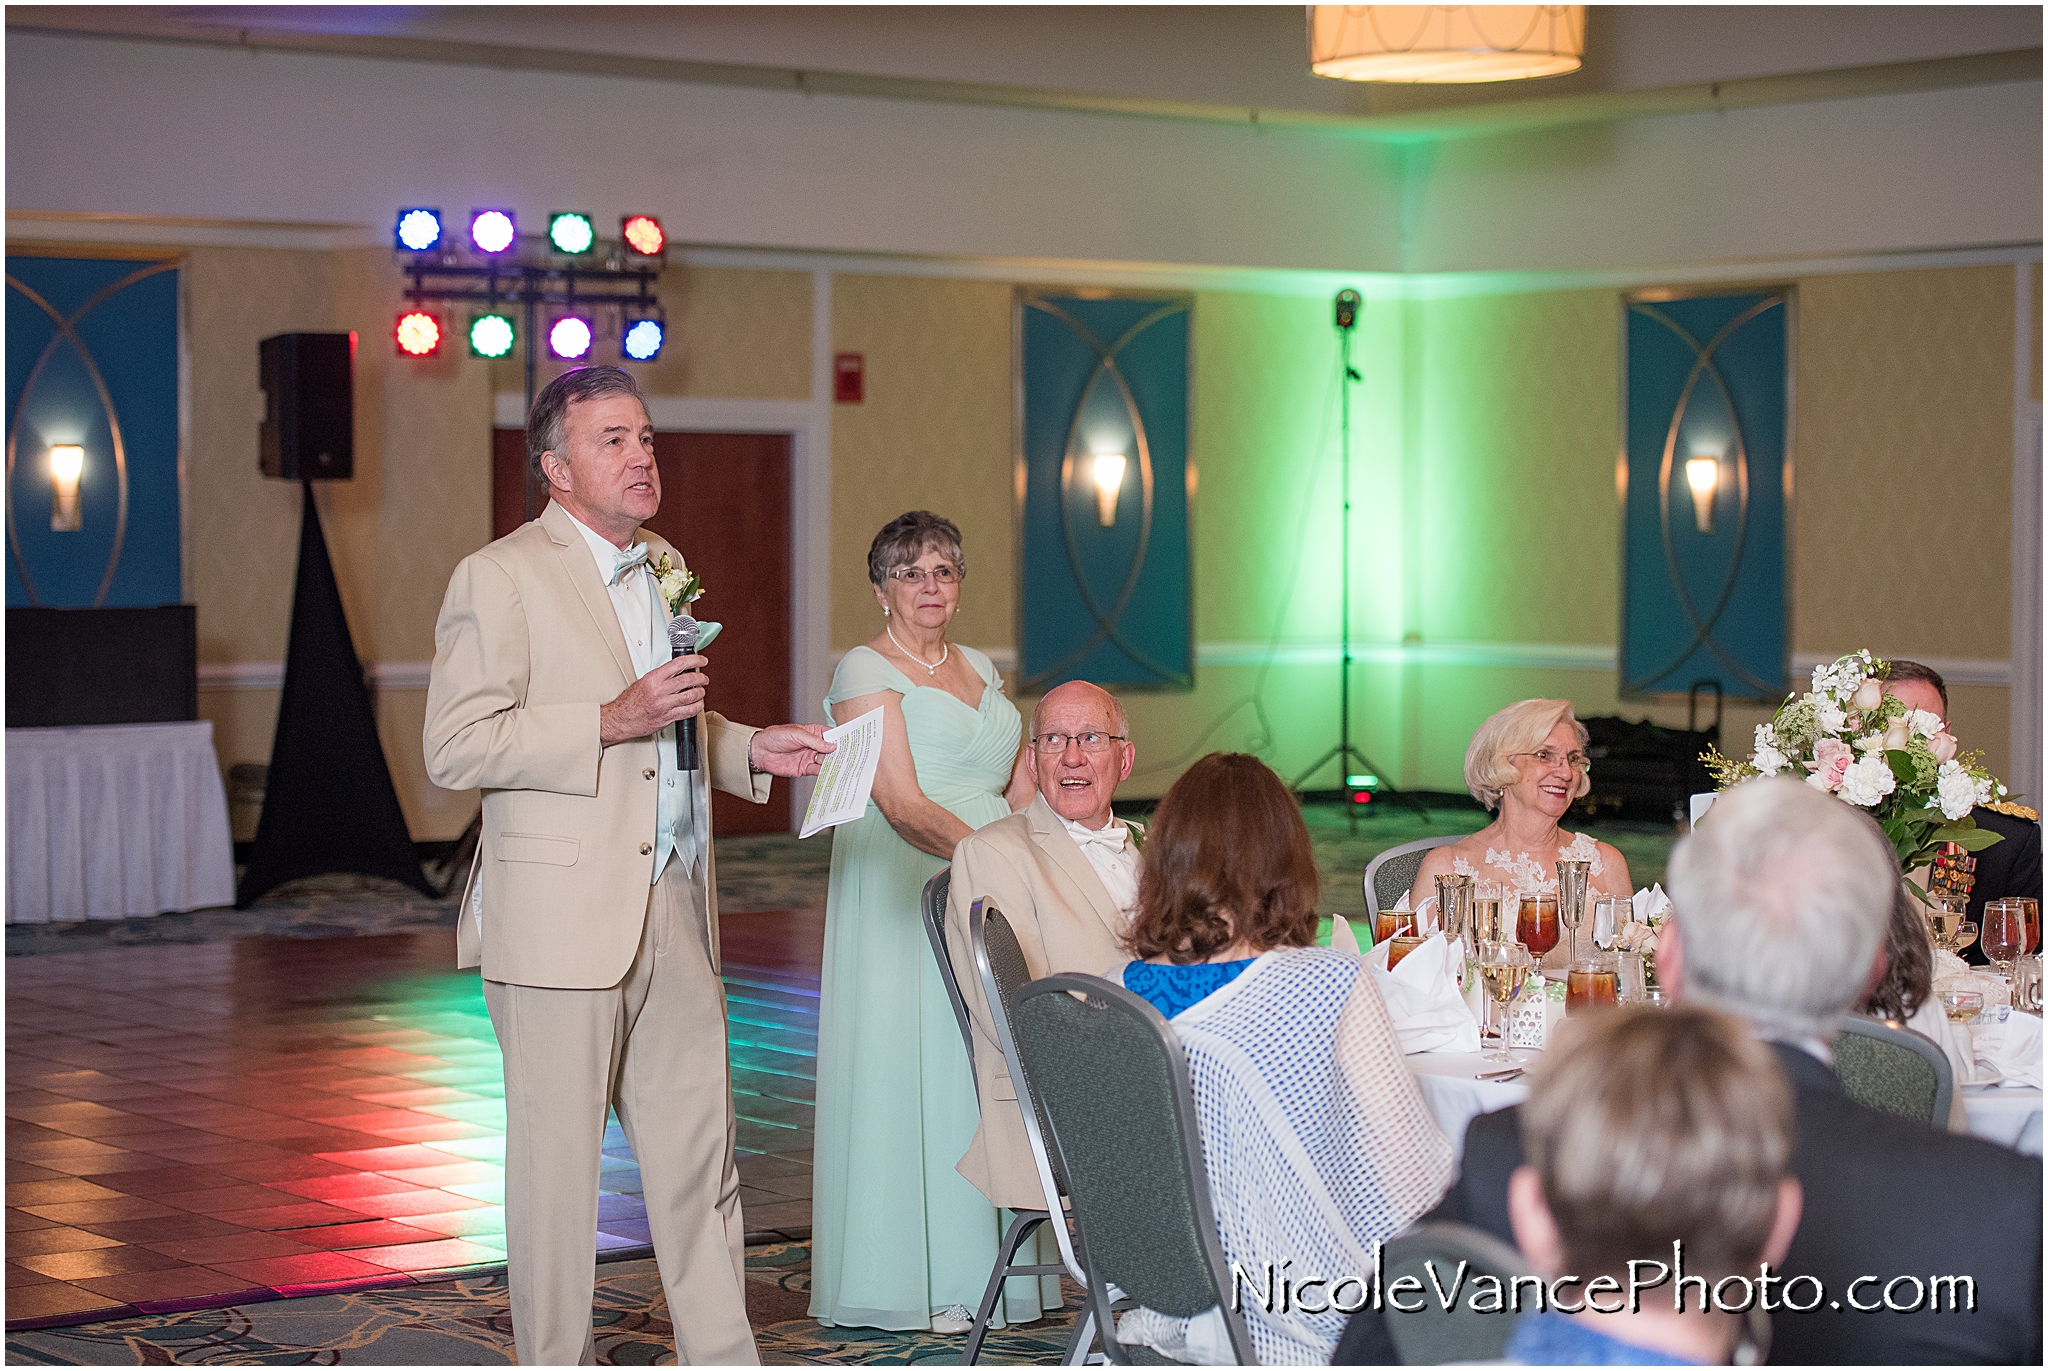 The best man proposes a toast to the bride and groom are announced into the ballroom at the Doubletree by Hilton Richmond-Midlothian.